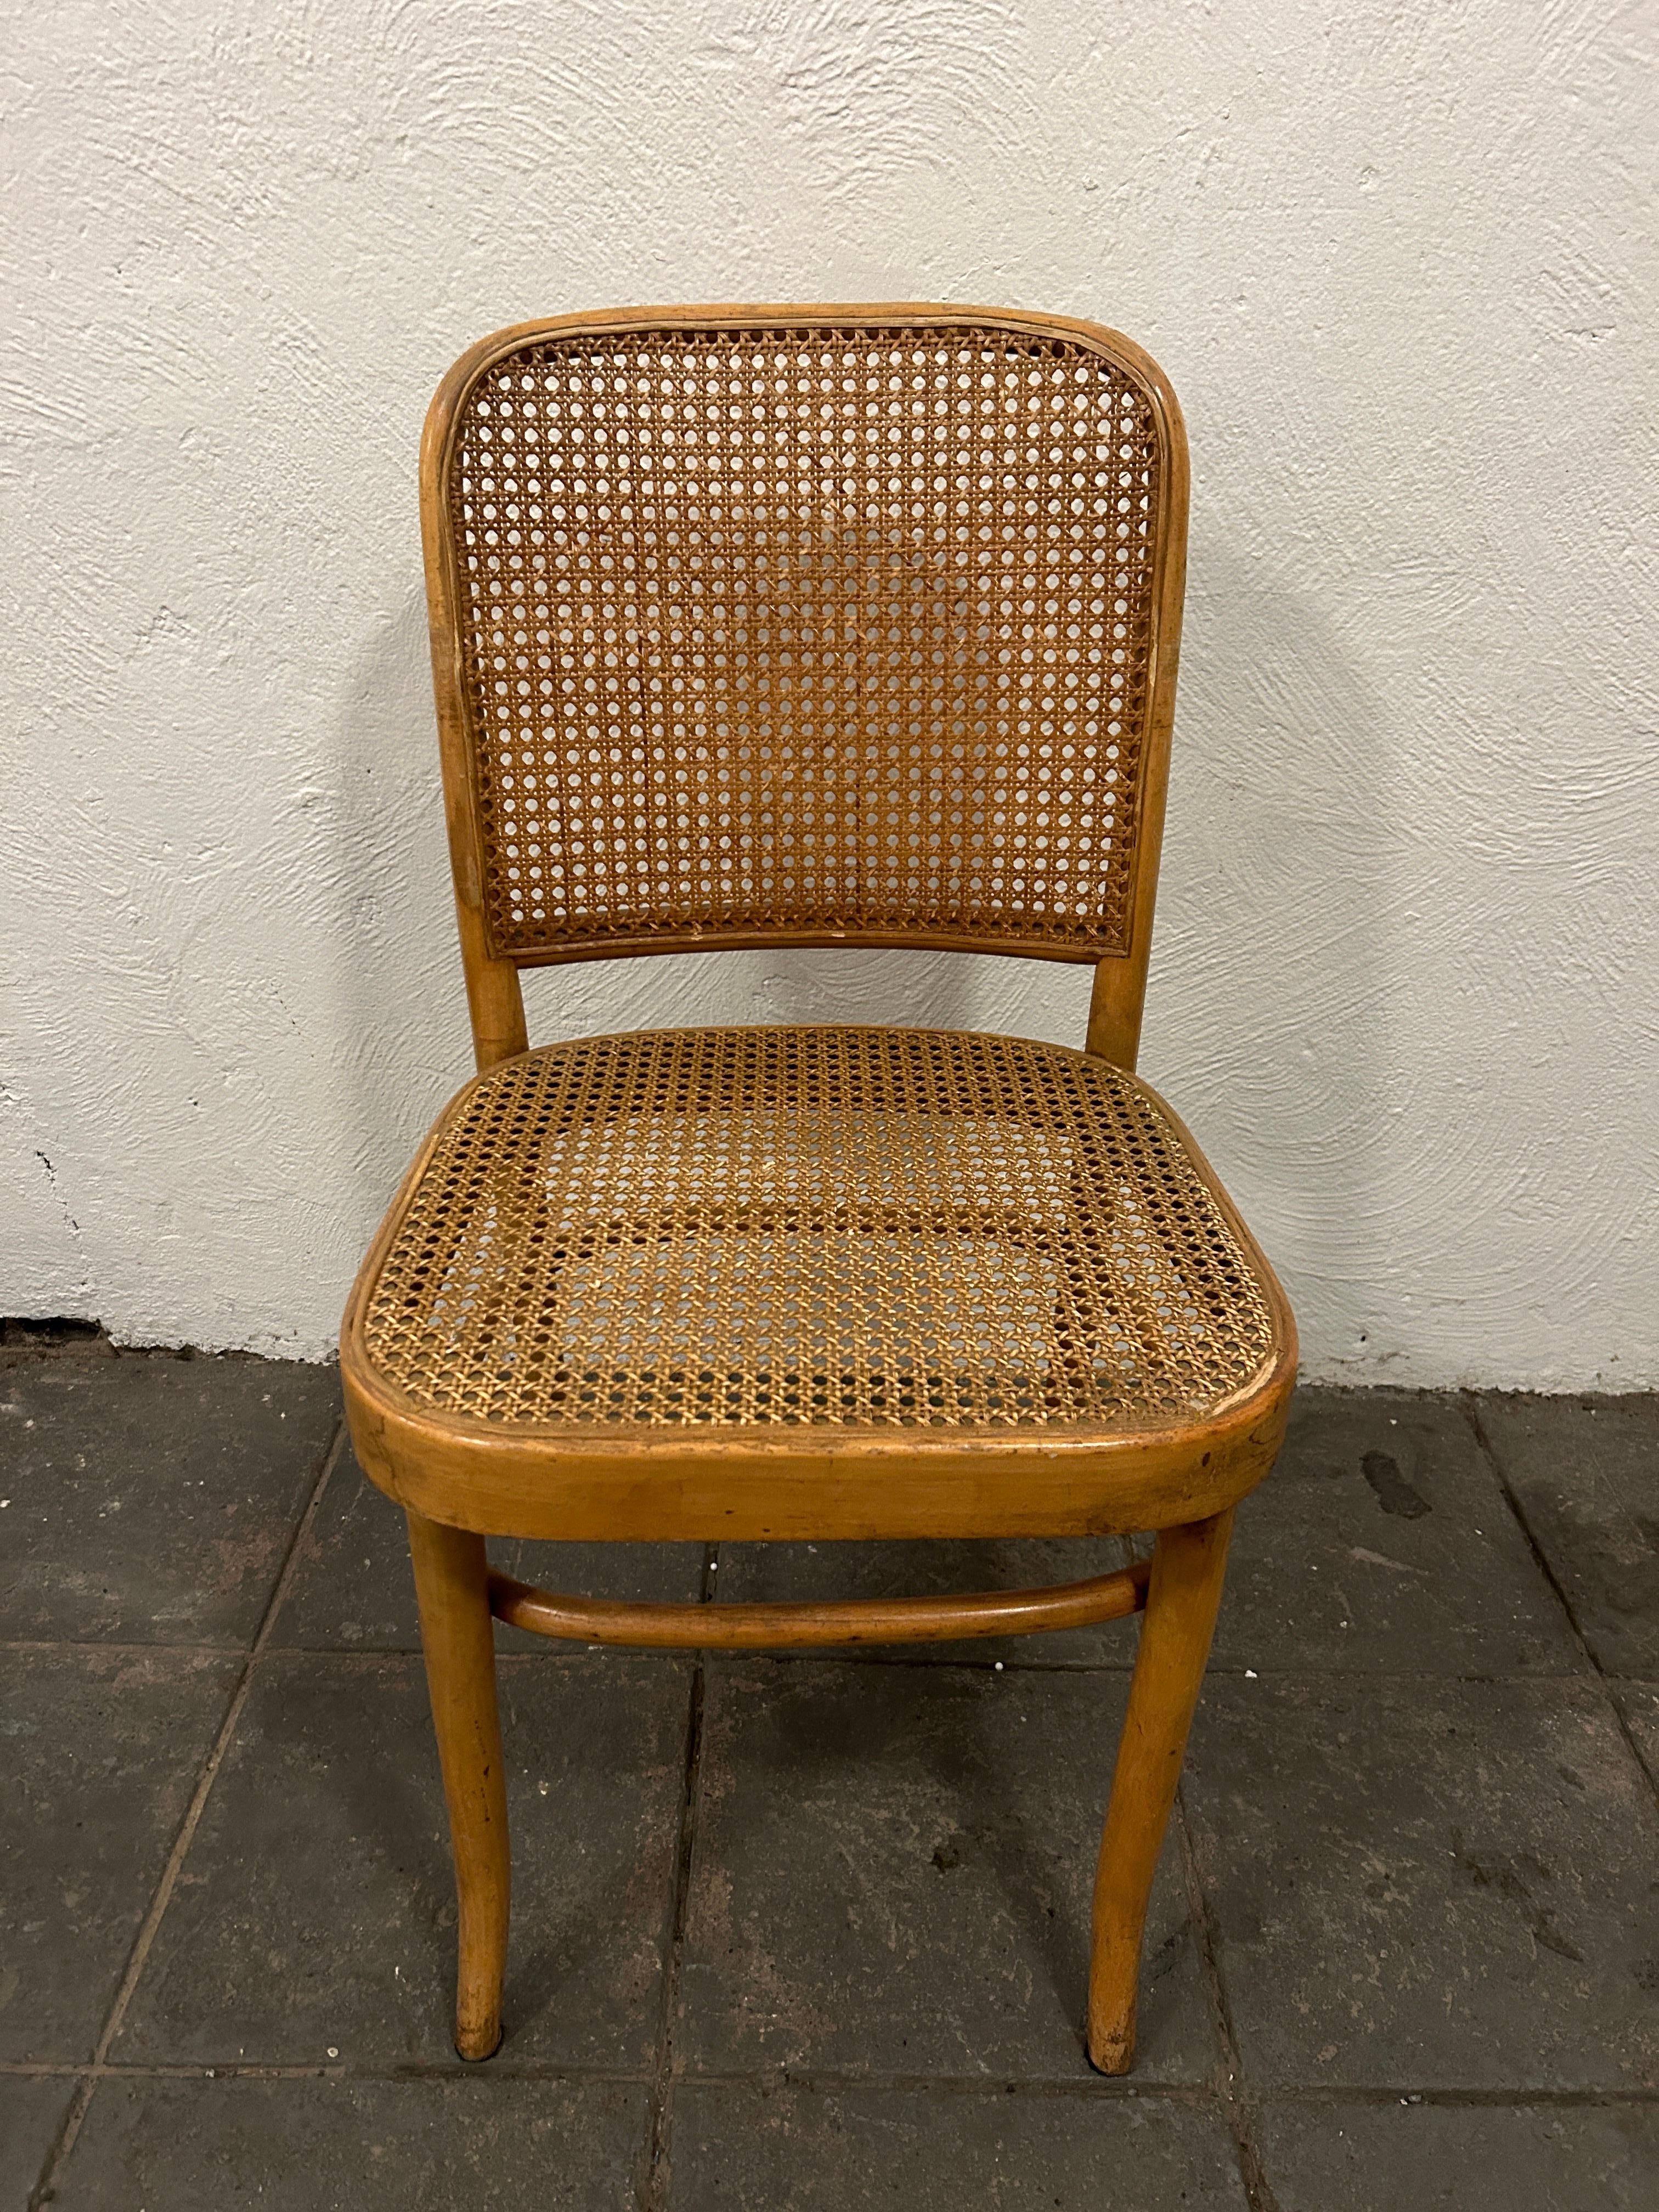 Mid Century Vintage Birch Cane Dining Chair by Josef Hoffman. All side chairs in Vintage condition. (8) Chairs available all in the same condition. Made Circa 1950. Wood shows patina and fading.

Height: 30